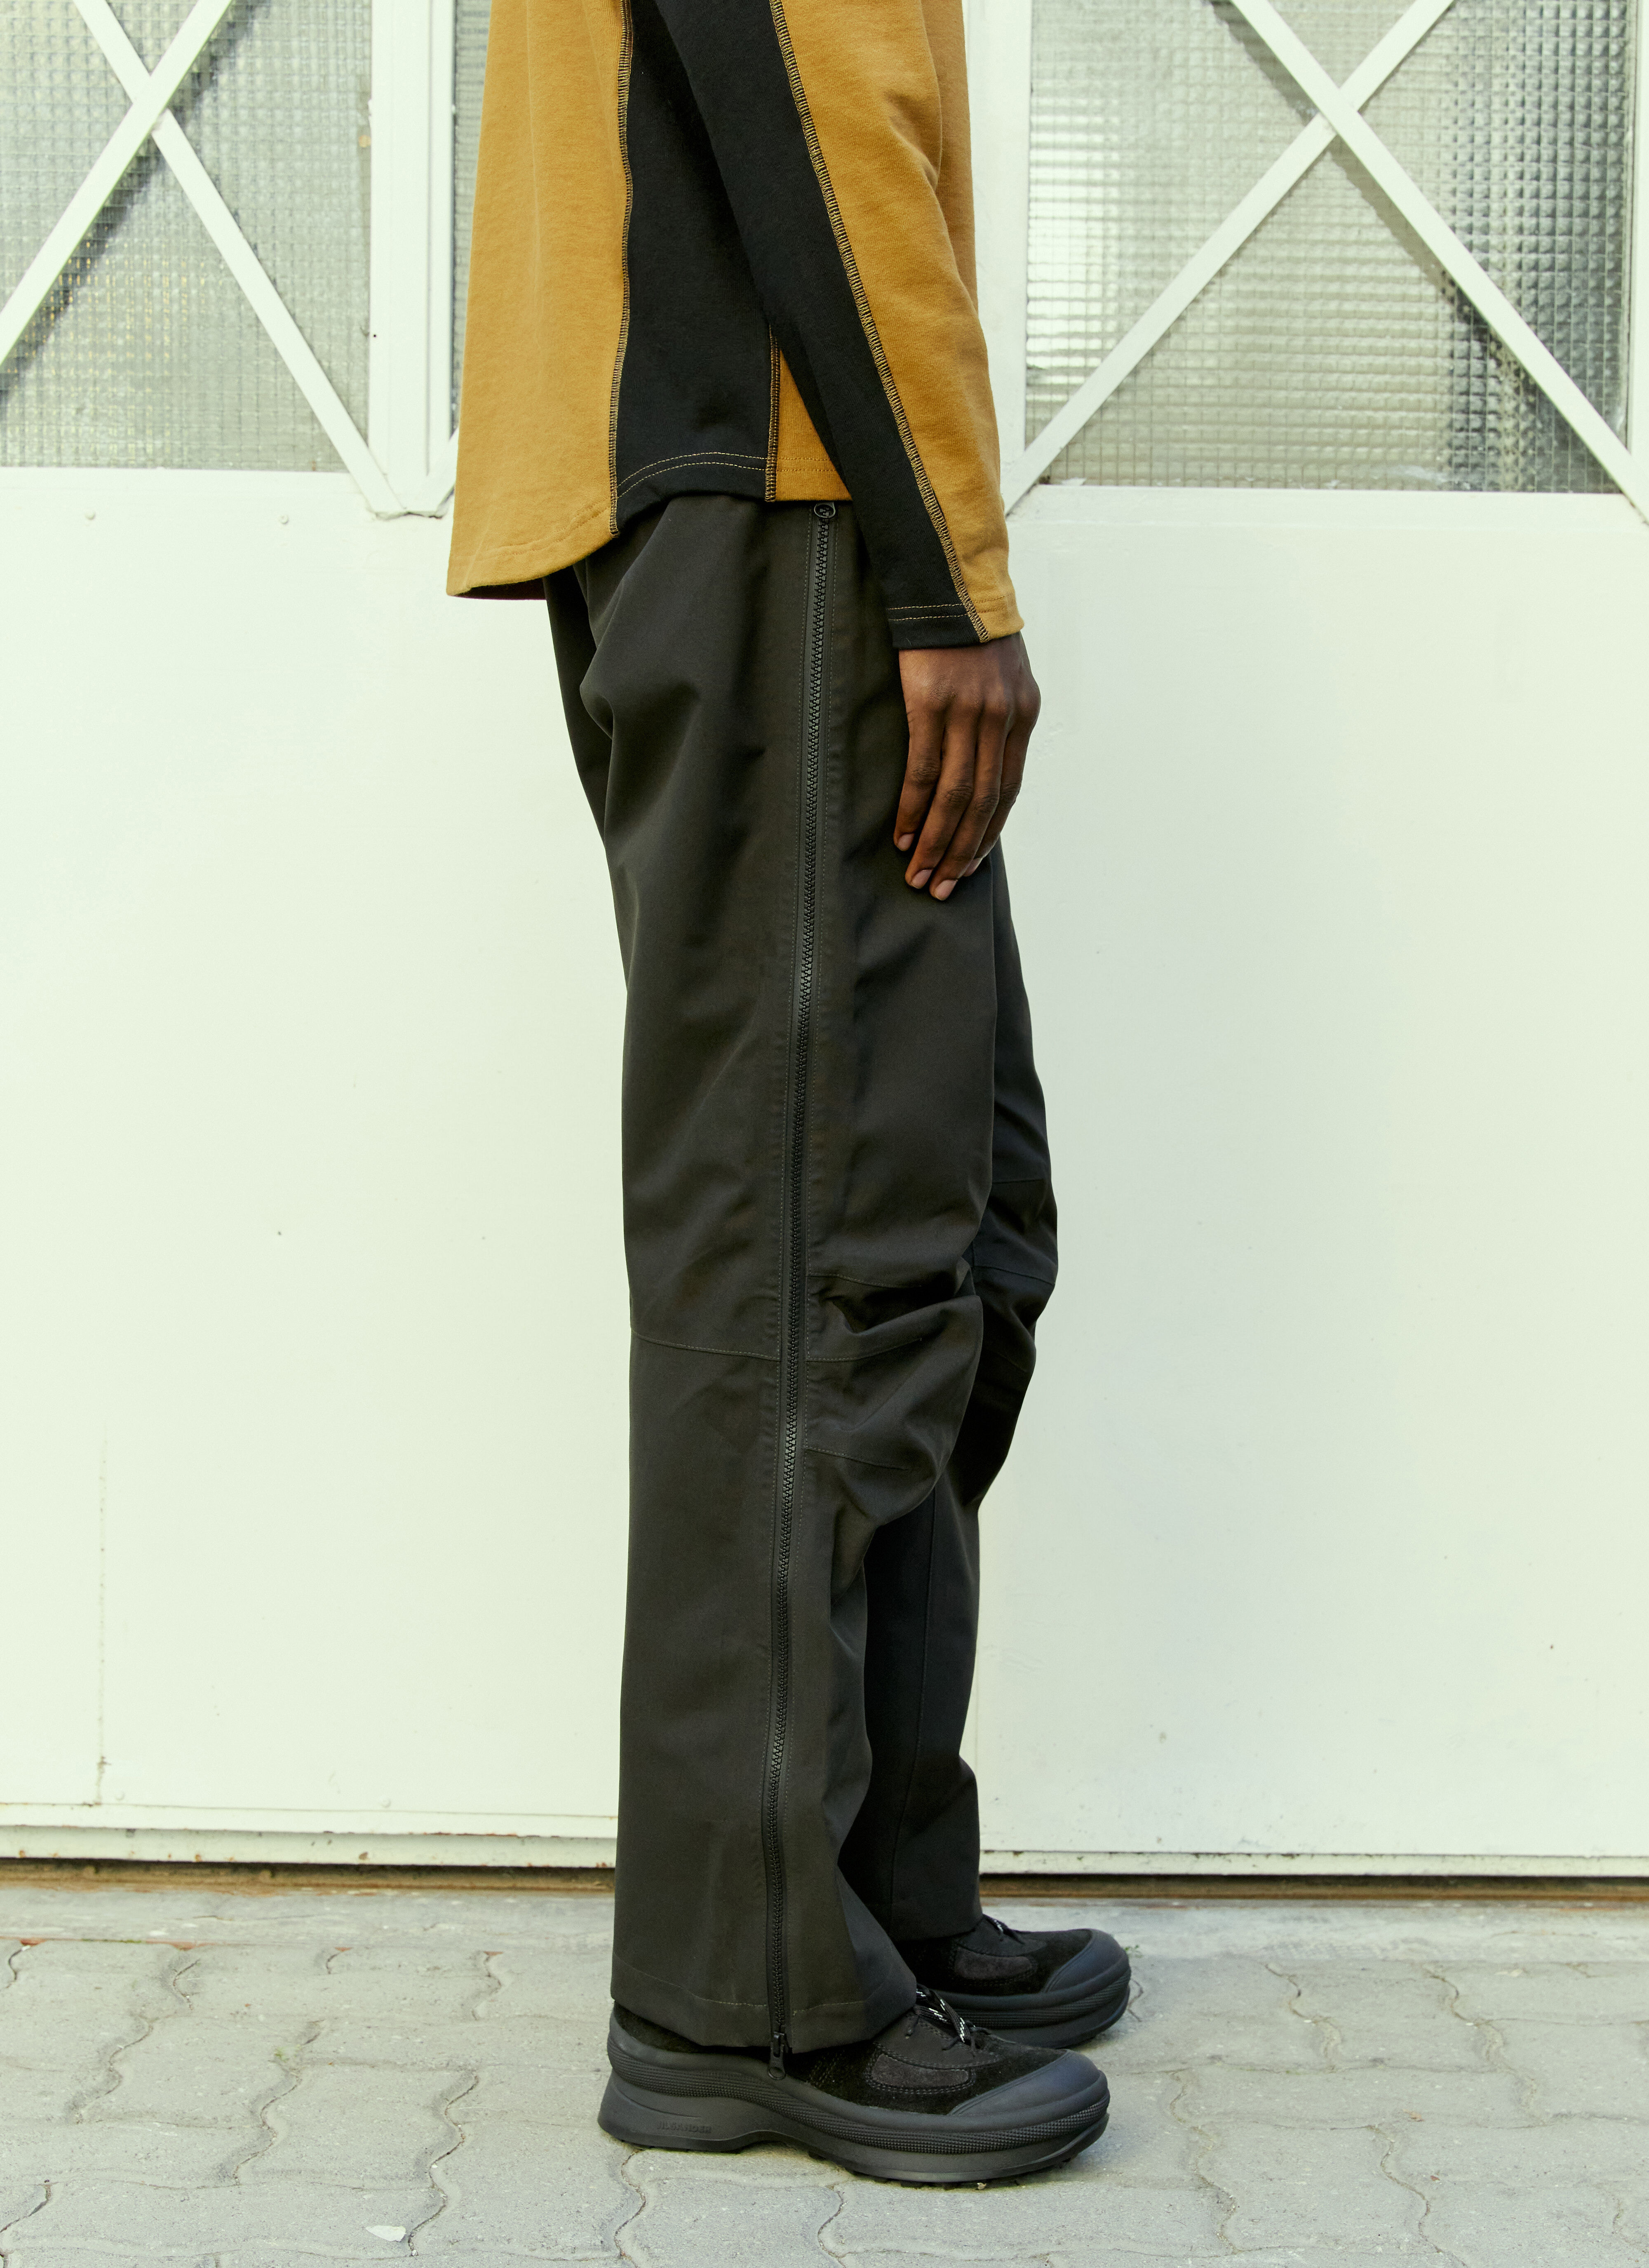 ERL Bembeculla Arc Pants Yellow erl0156017